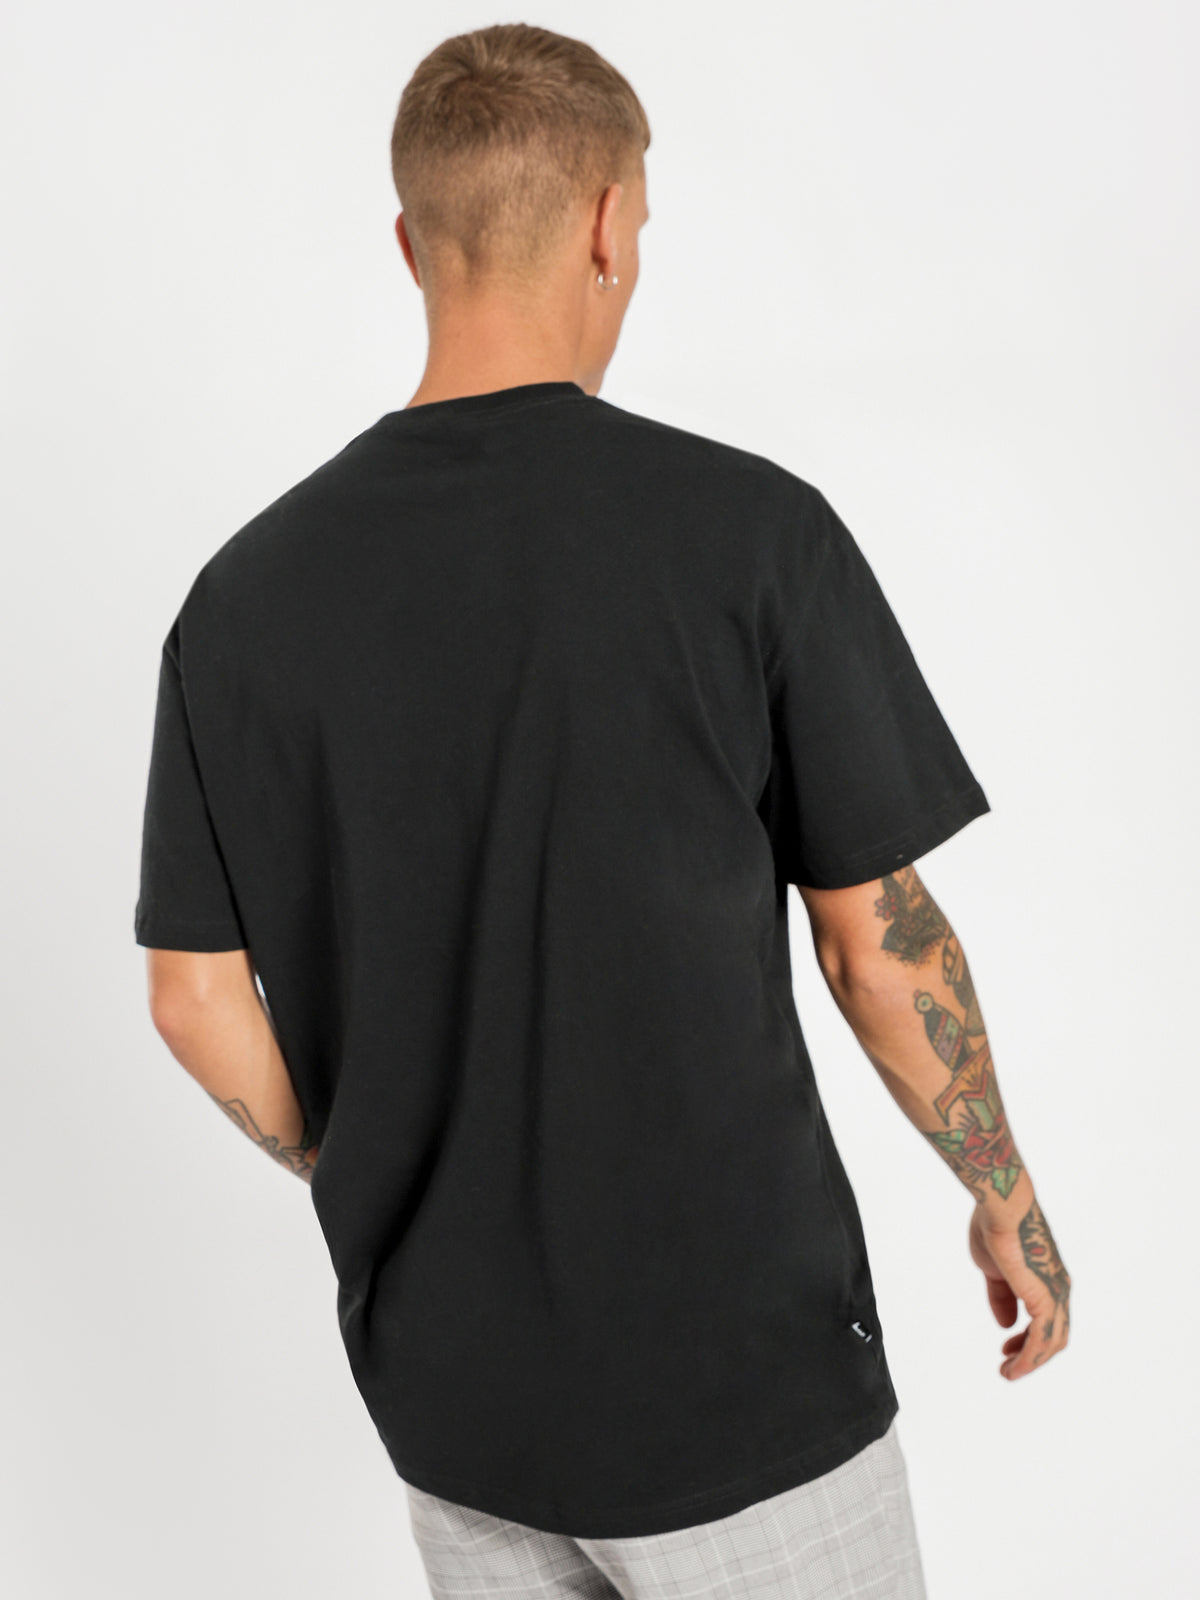 Solid Tour Short Sleeve T-Shirt in Black